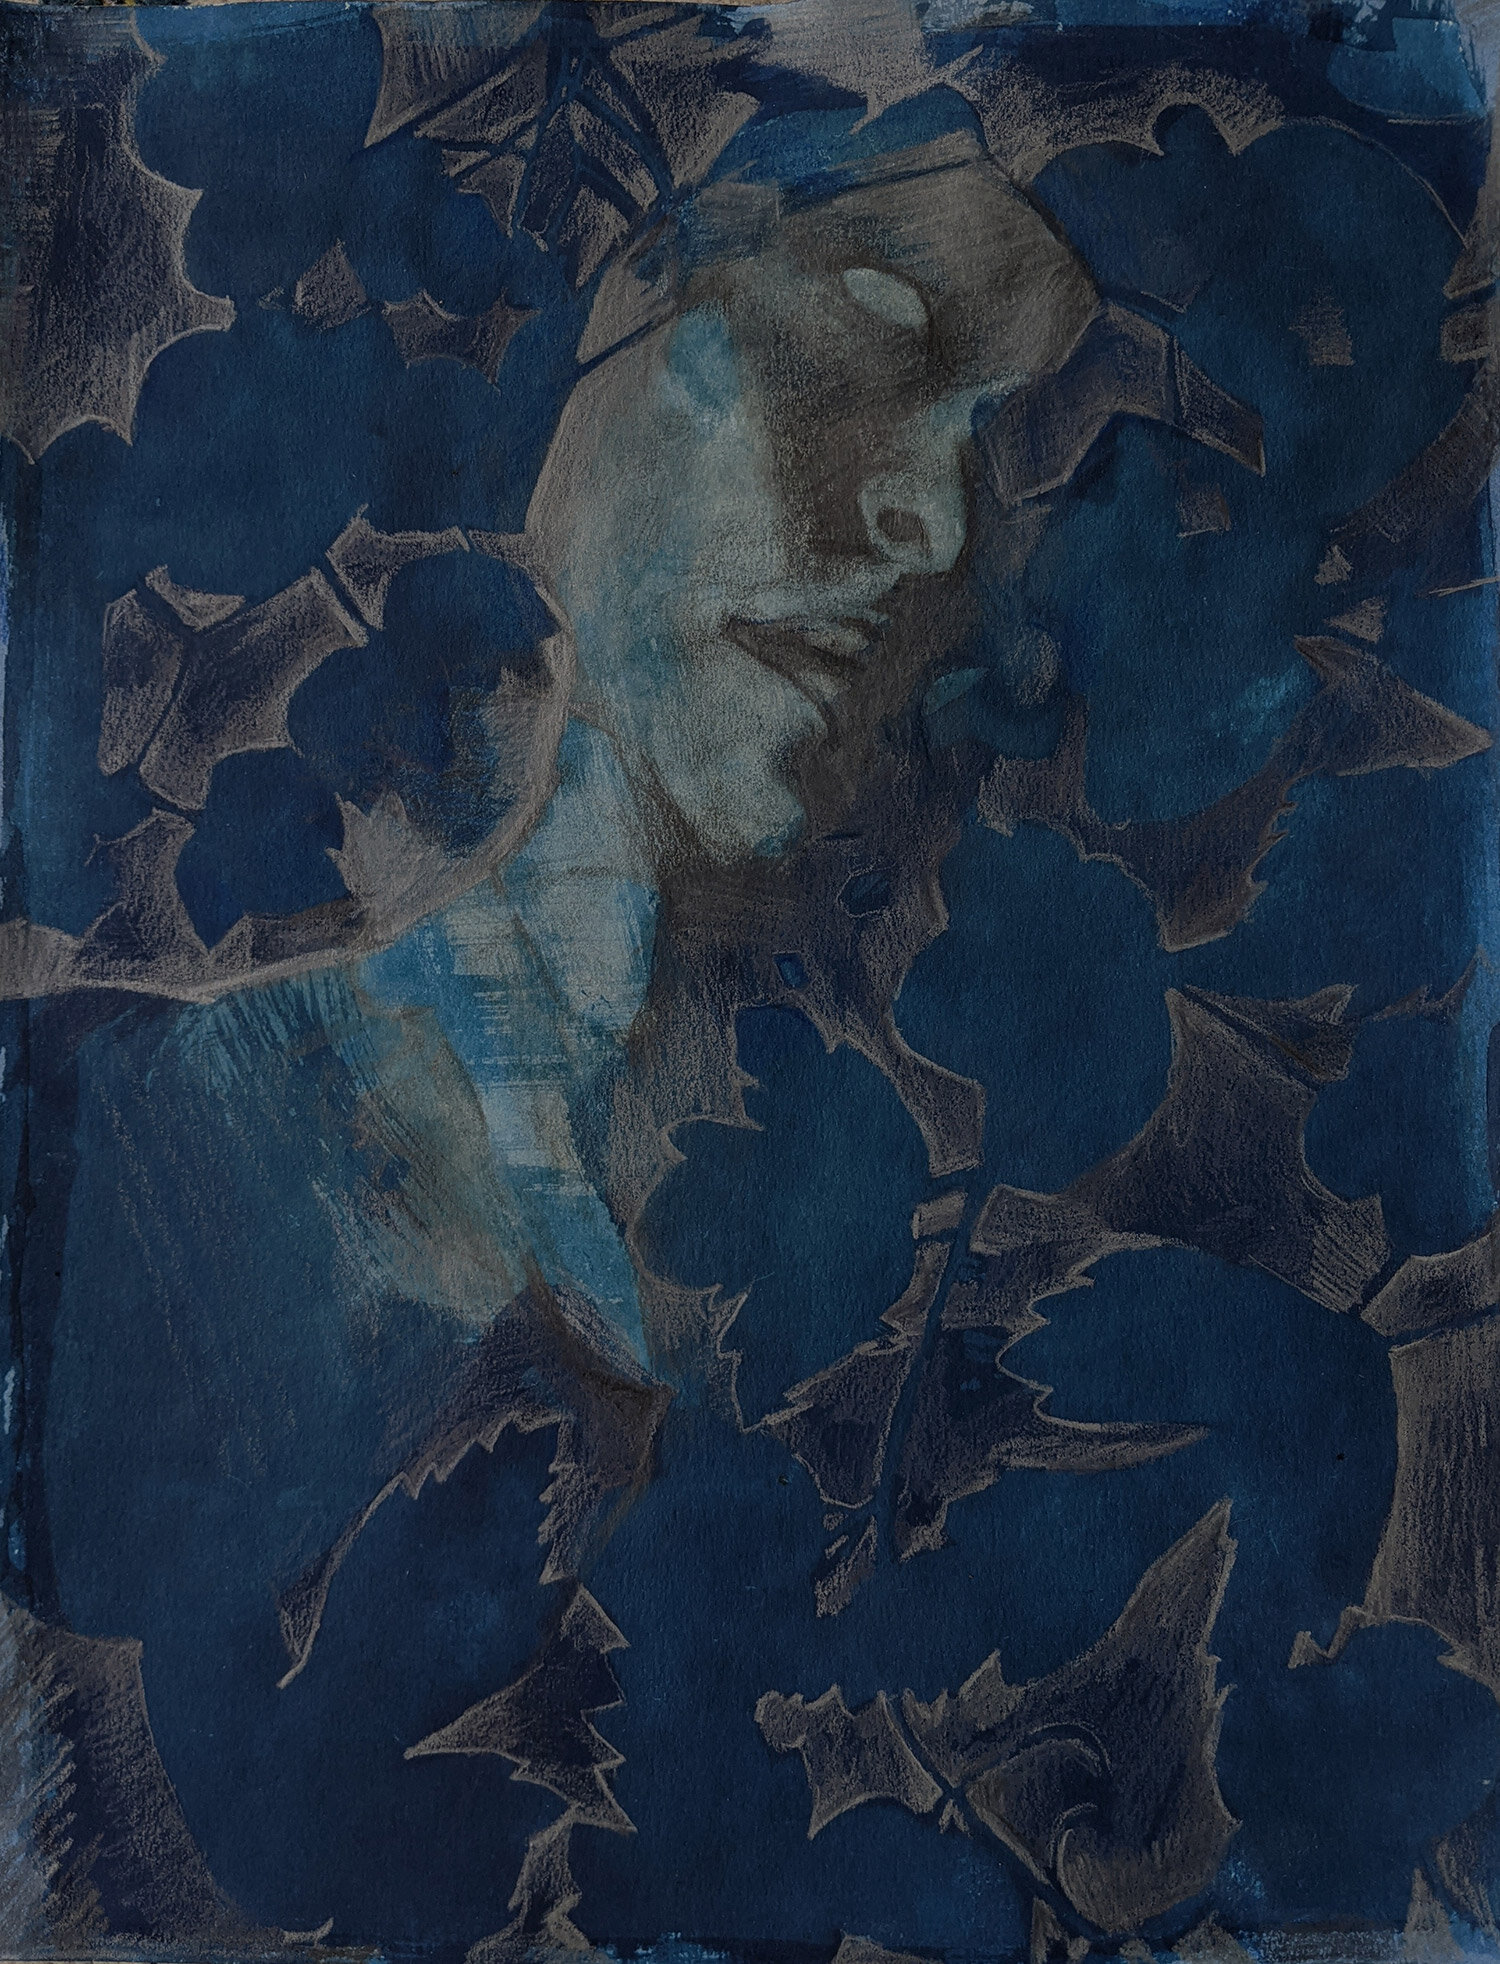   Lost In The Light,  Cyanotype and graphite on panel, 14x11, 2020, Available 